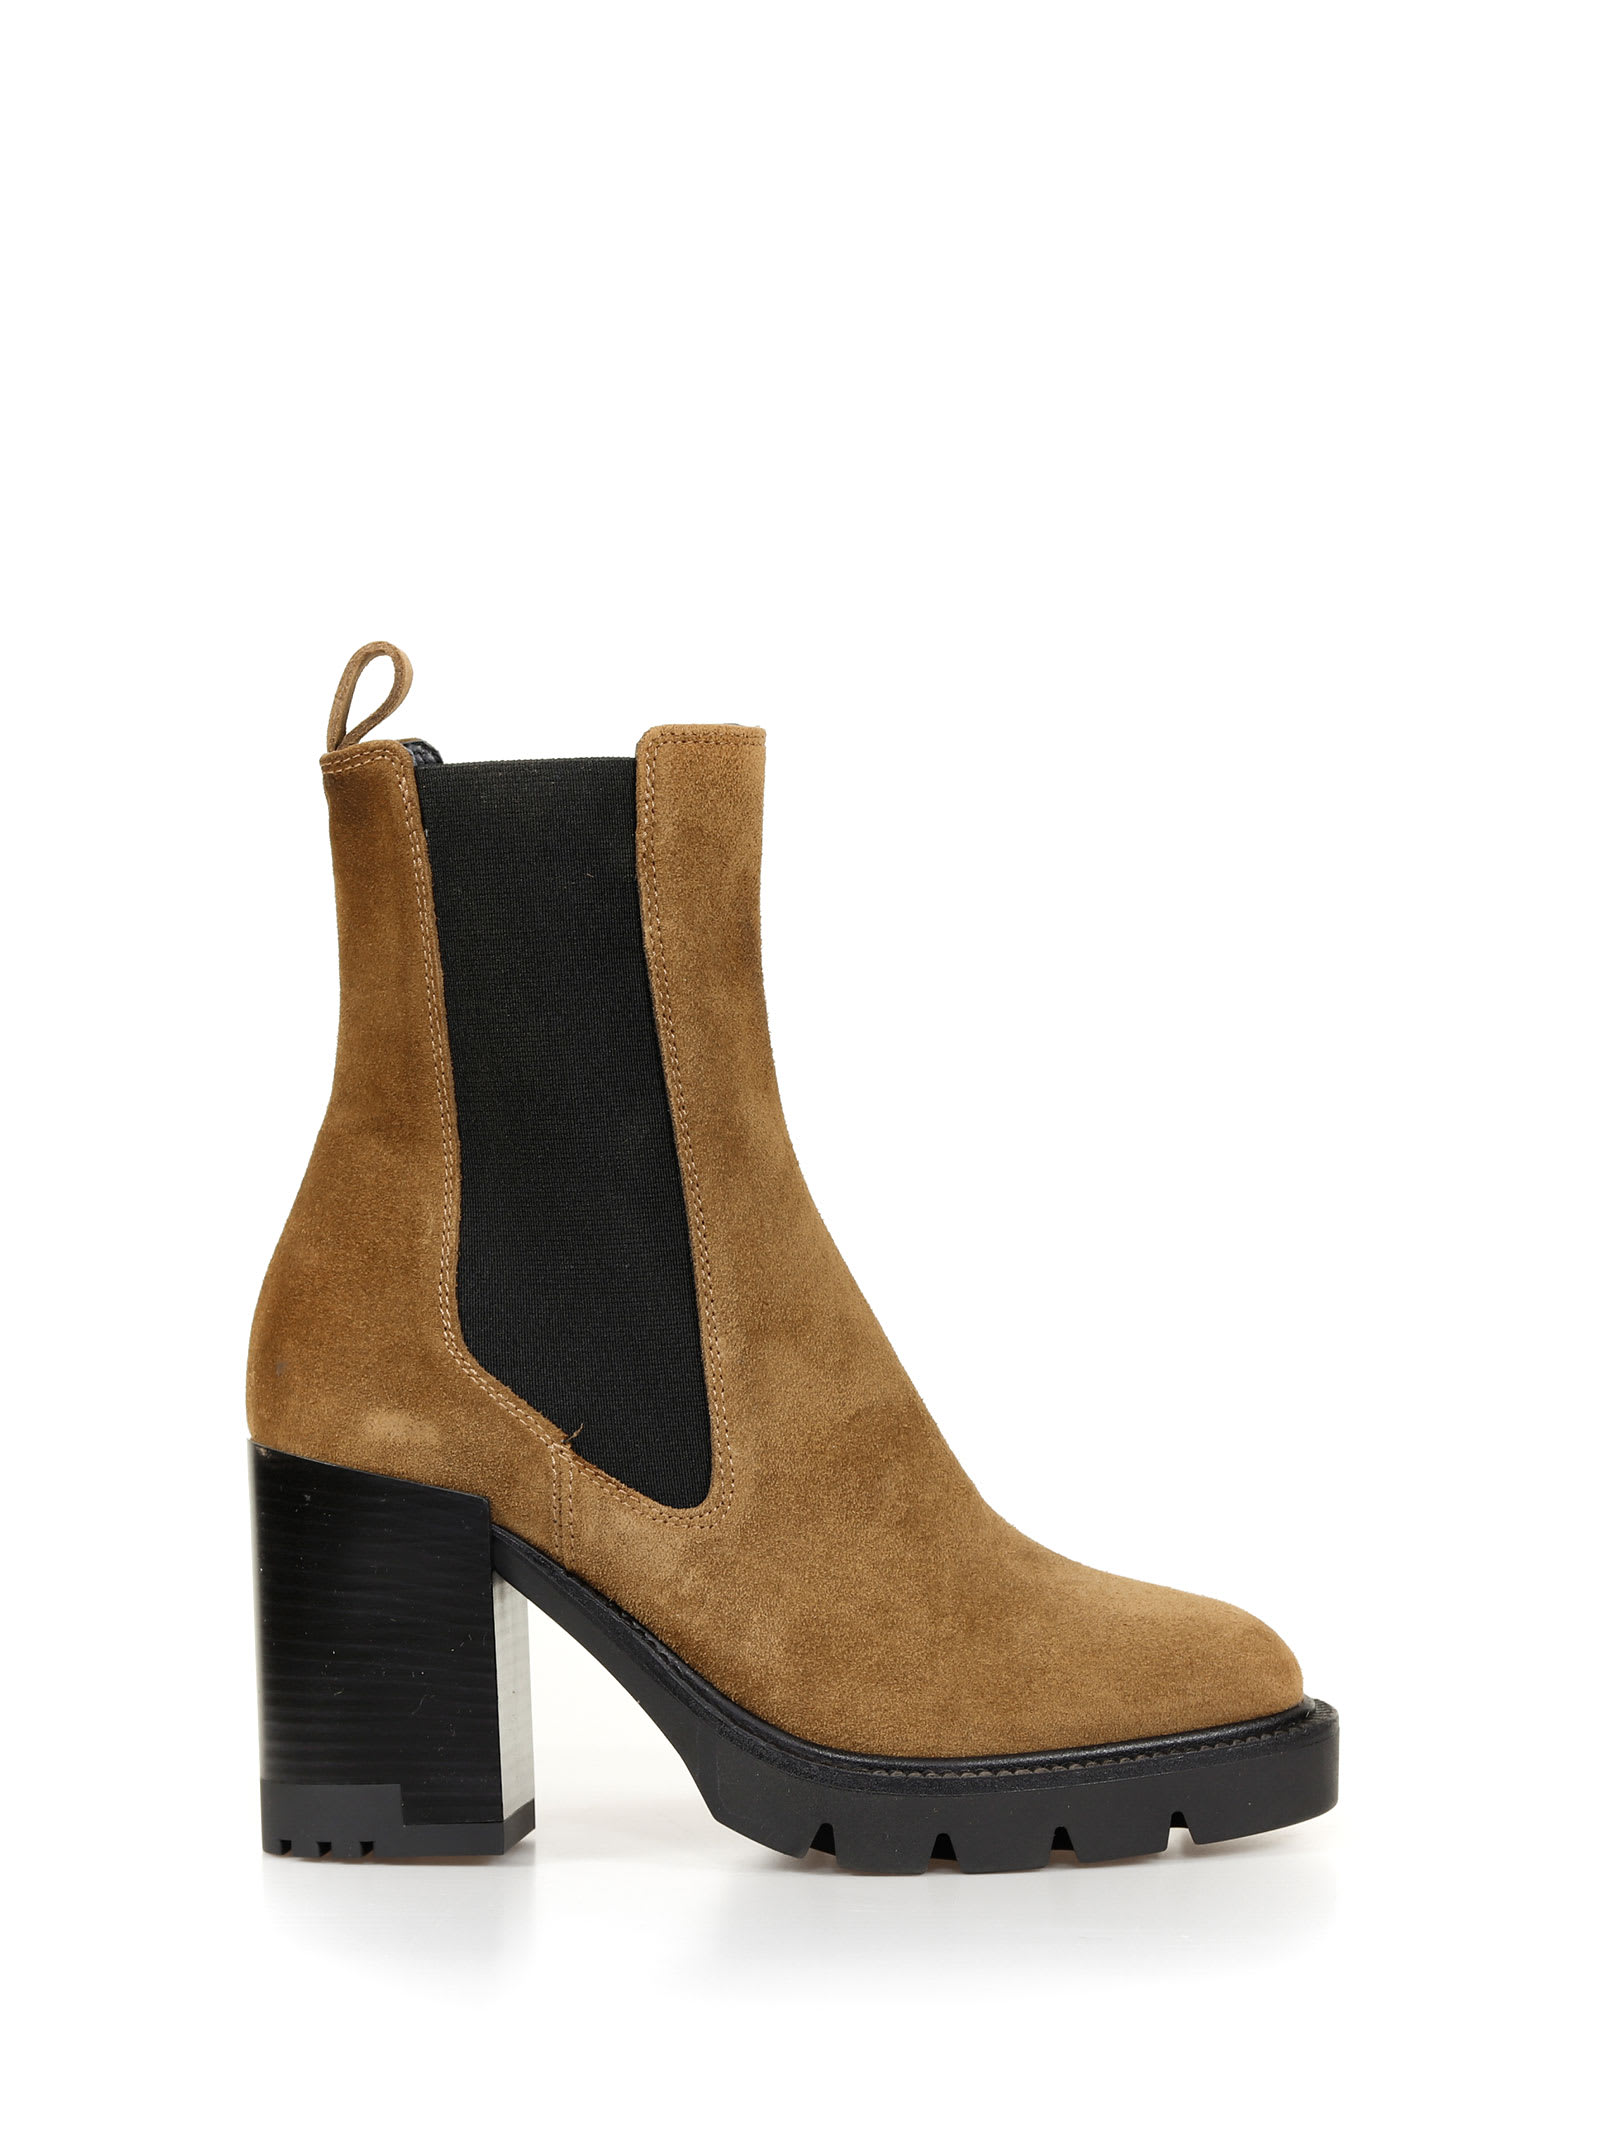 Janet & Janet Suede Ankle Boot Heel 7